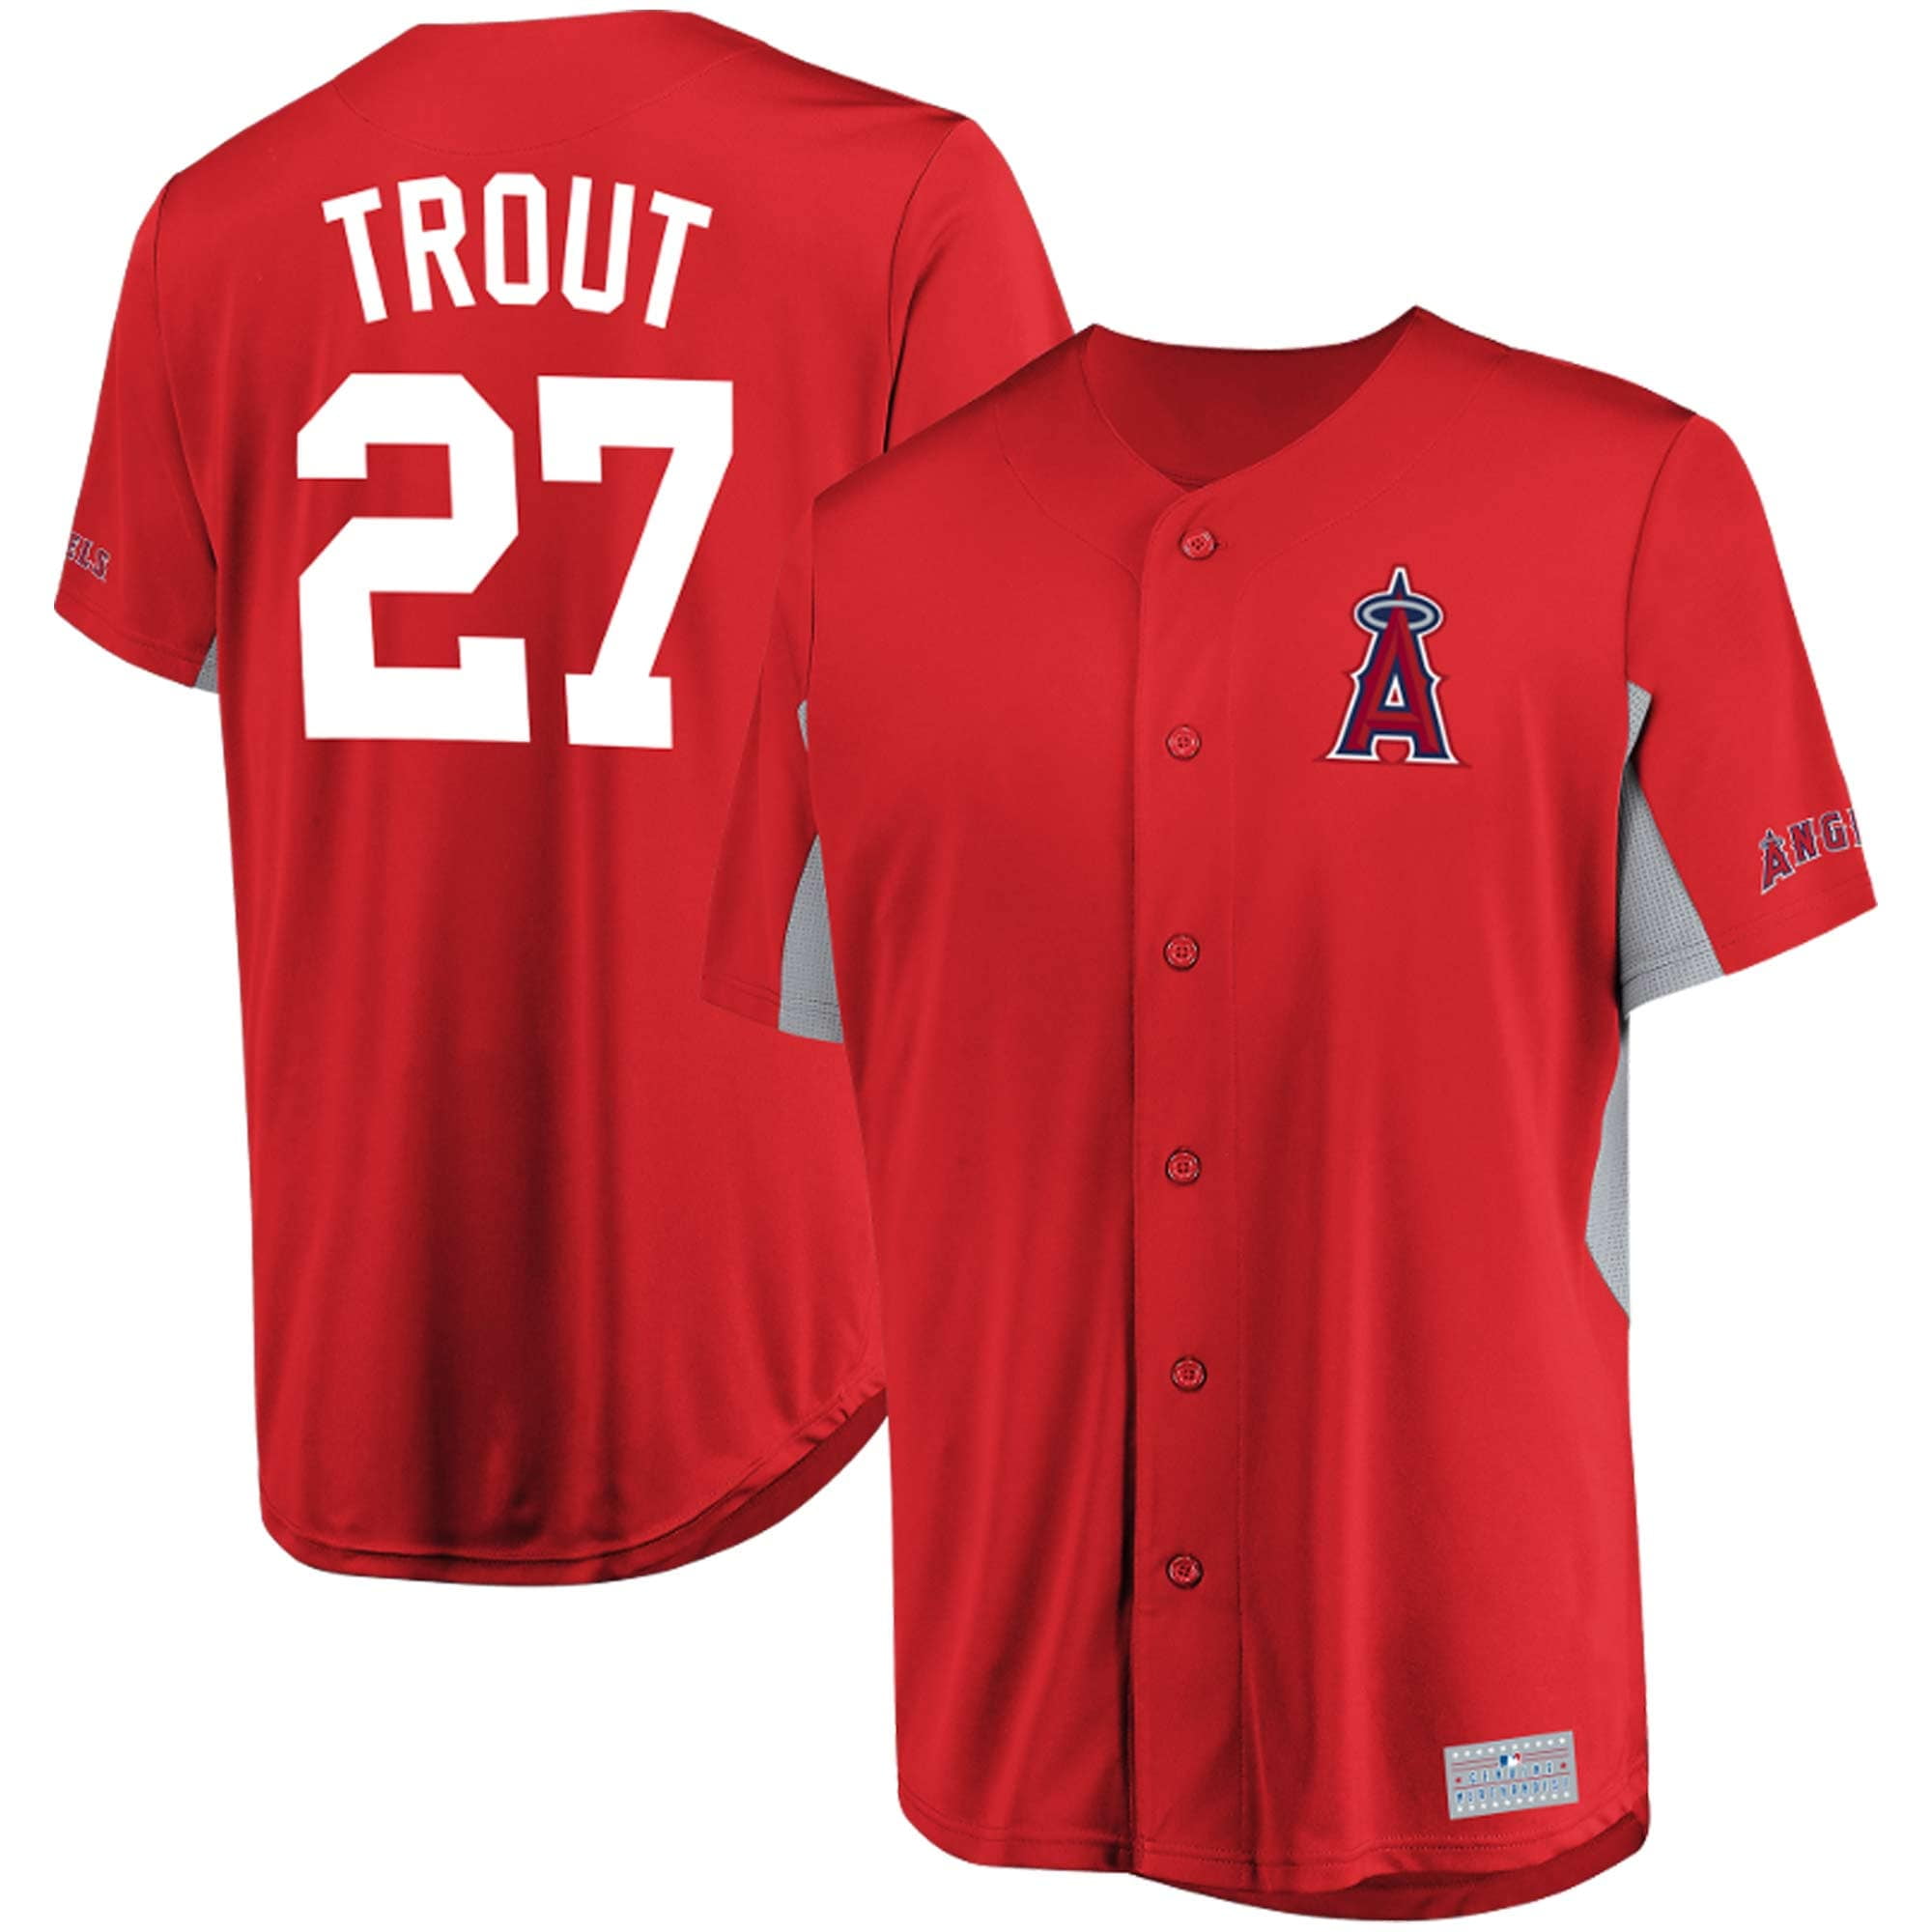 mlb mike trout jersey